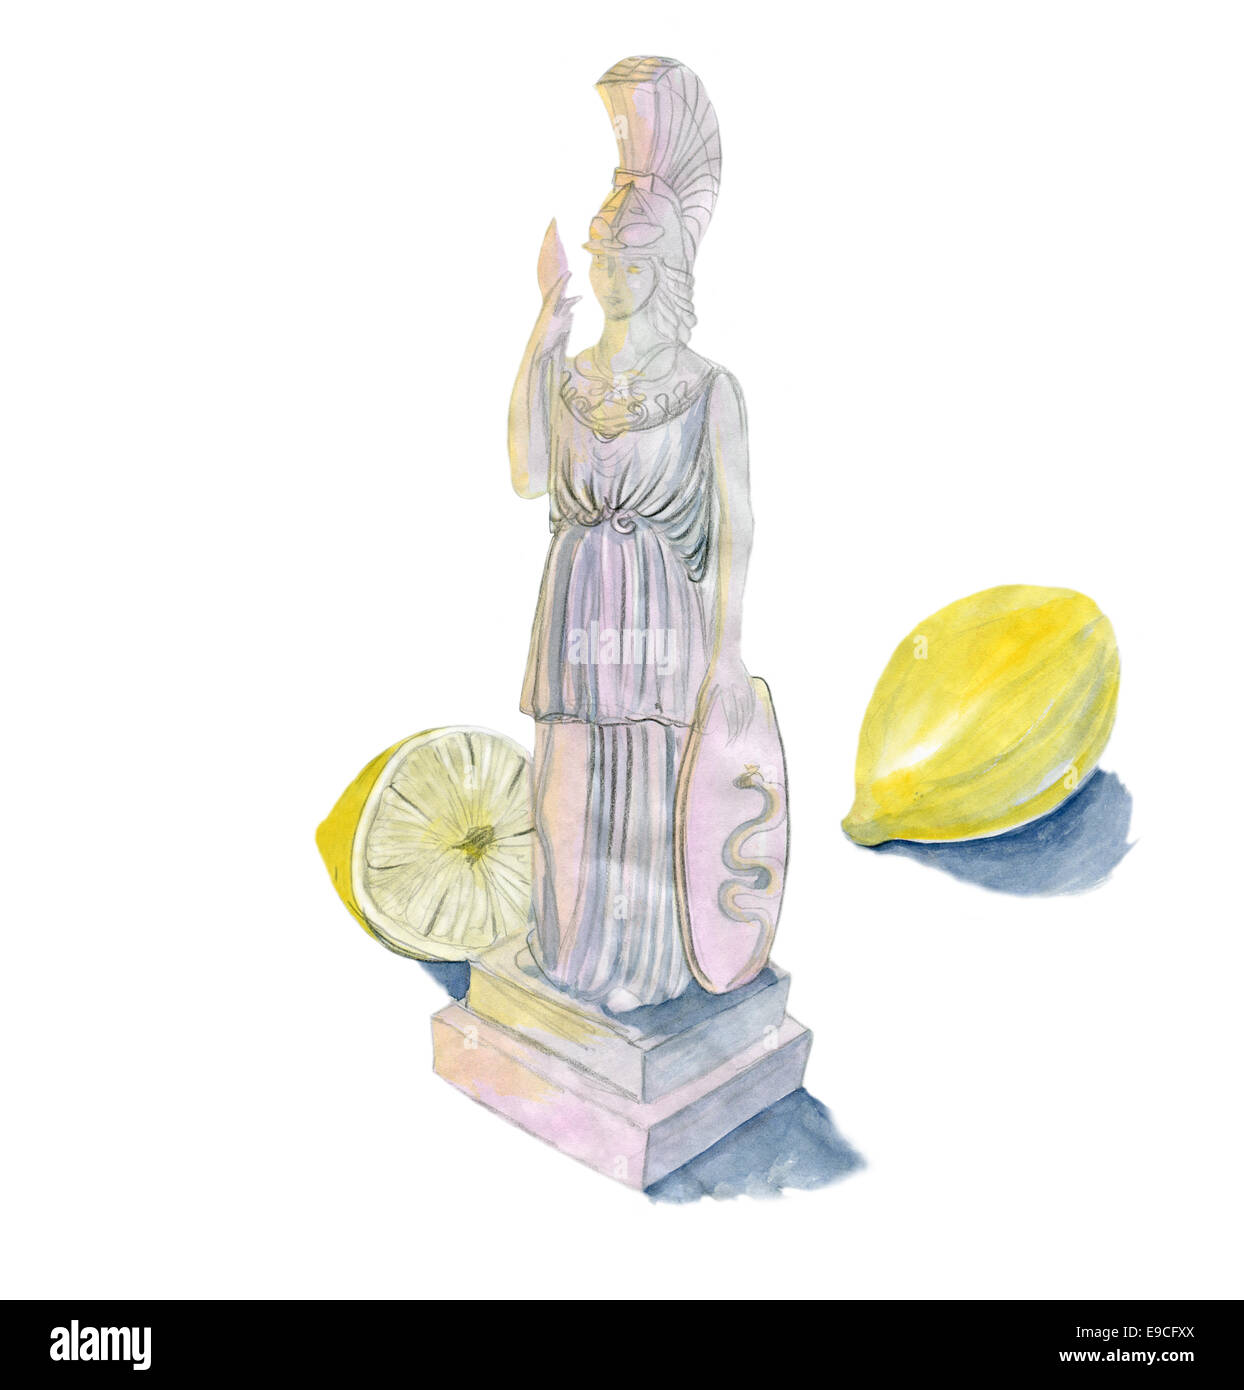 Pallas Athena and lemons, original watercolor sketch, isolated on white. Stock Photo